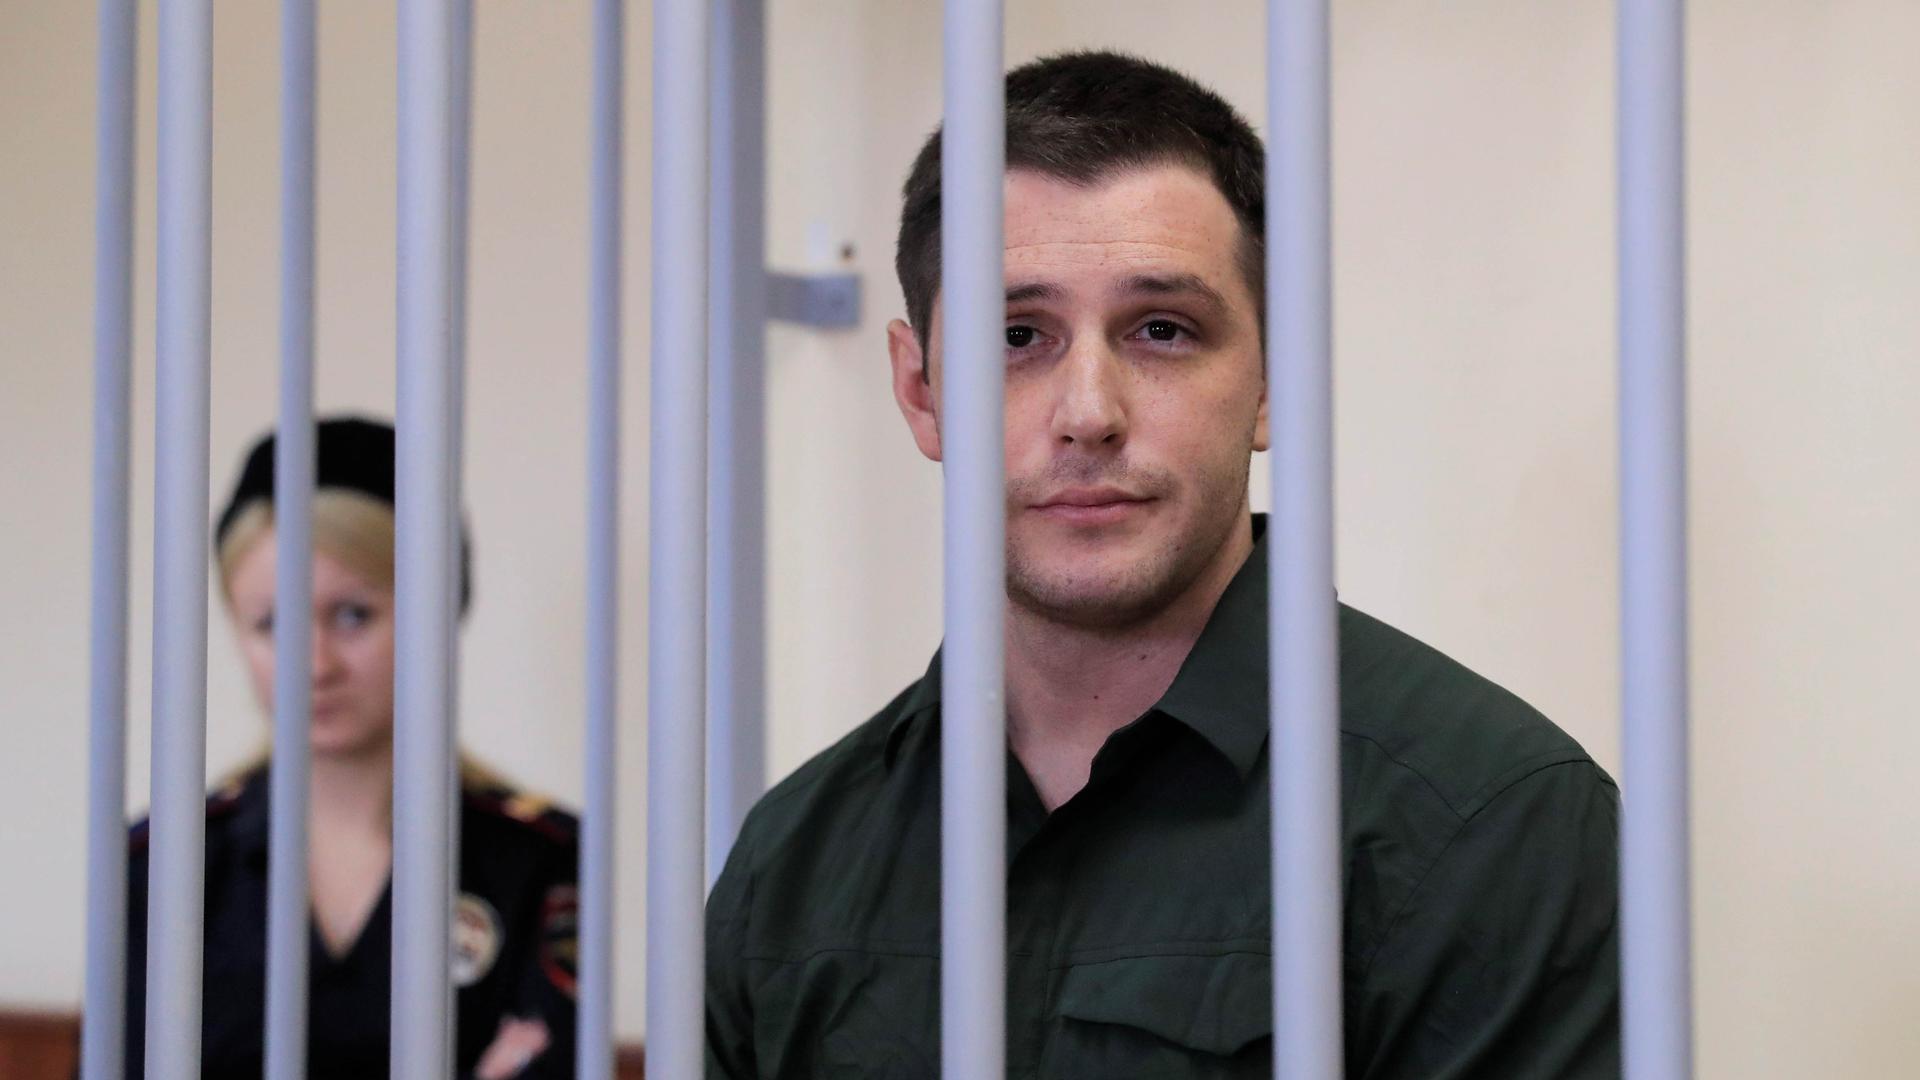 US ex-Marine Trevor Reed, who was detained in 2019 and accused of assaulting police officers, stands inside a defendants' cage during a court hearing in Moscow, Russia, March 11, 2020.